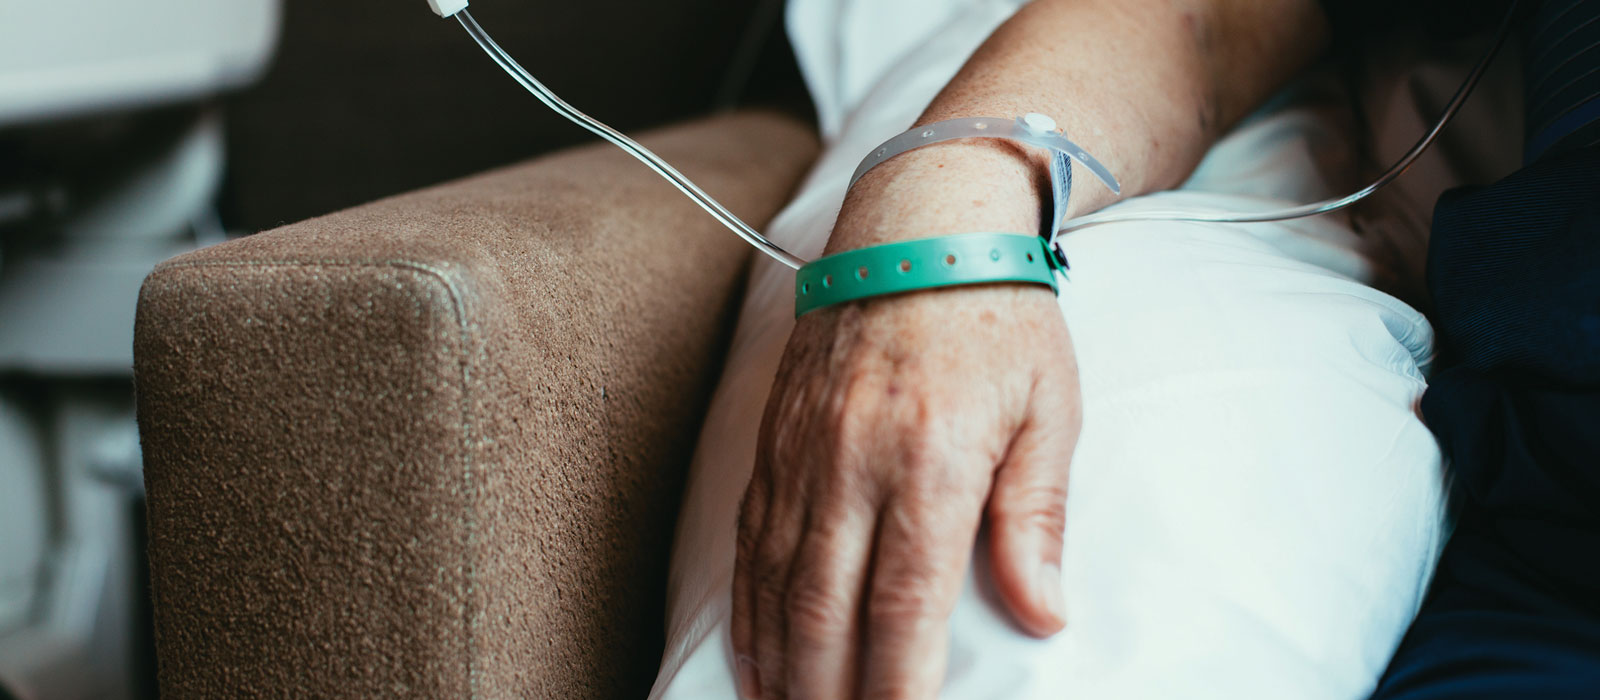 Is Palliative Care the Answer to the Medical Aid in Dying Discussion?